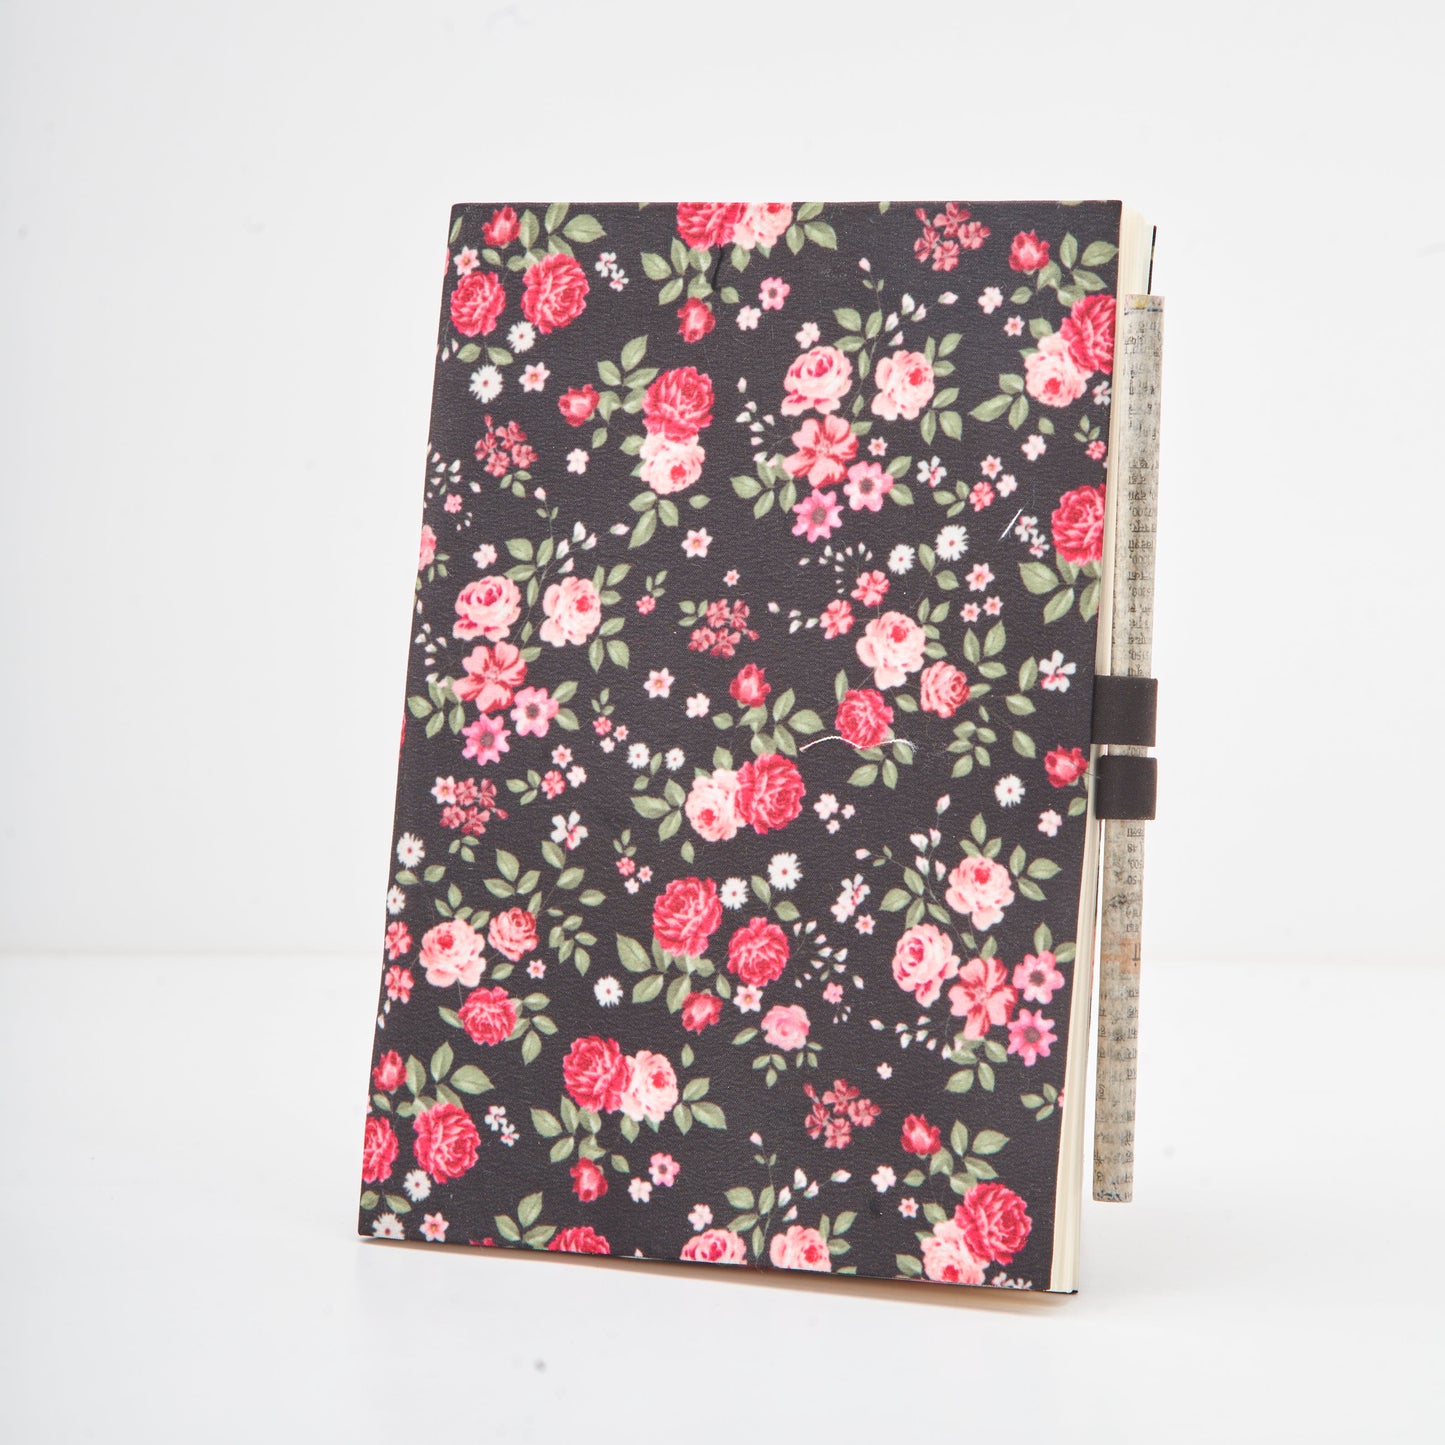 Garden of Flowers Print on Diary Cover with Newspaper Pencil